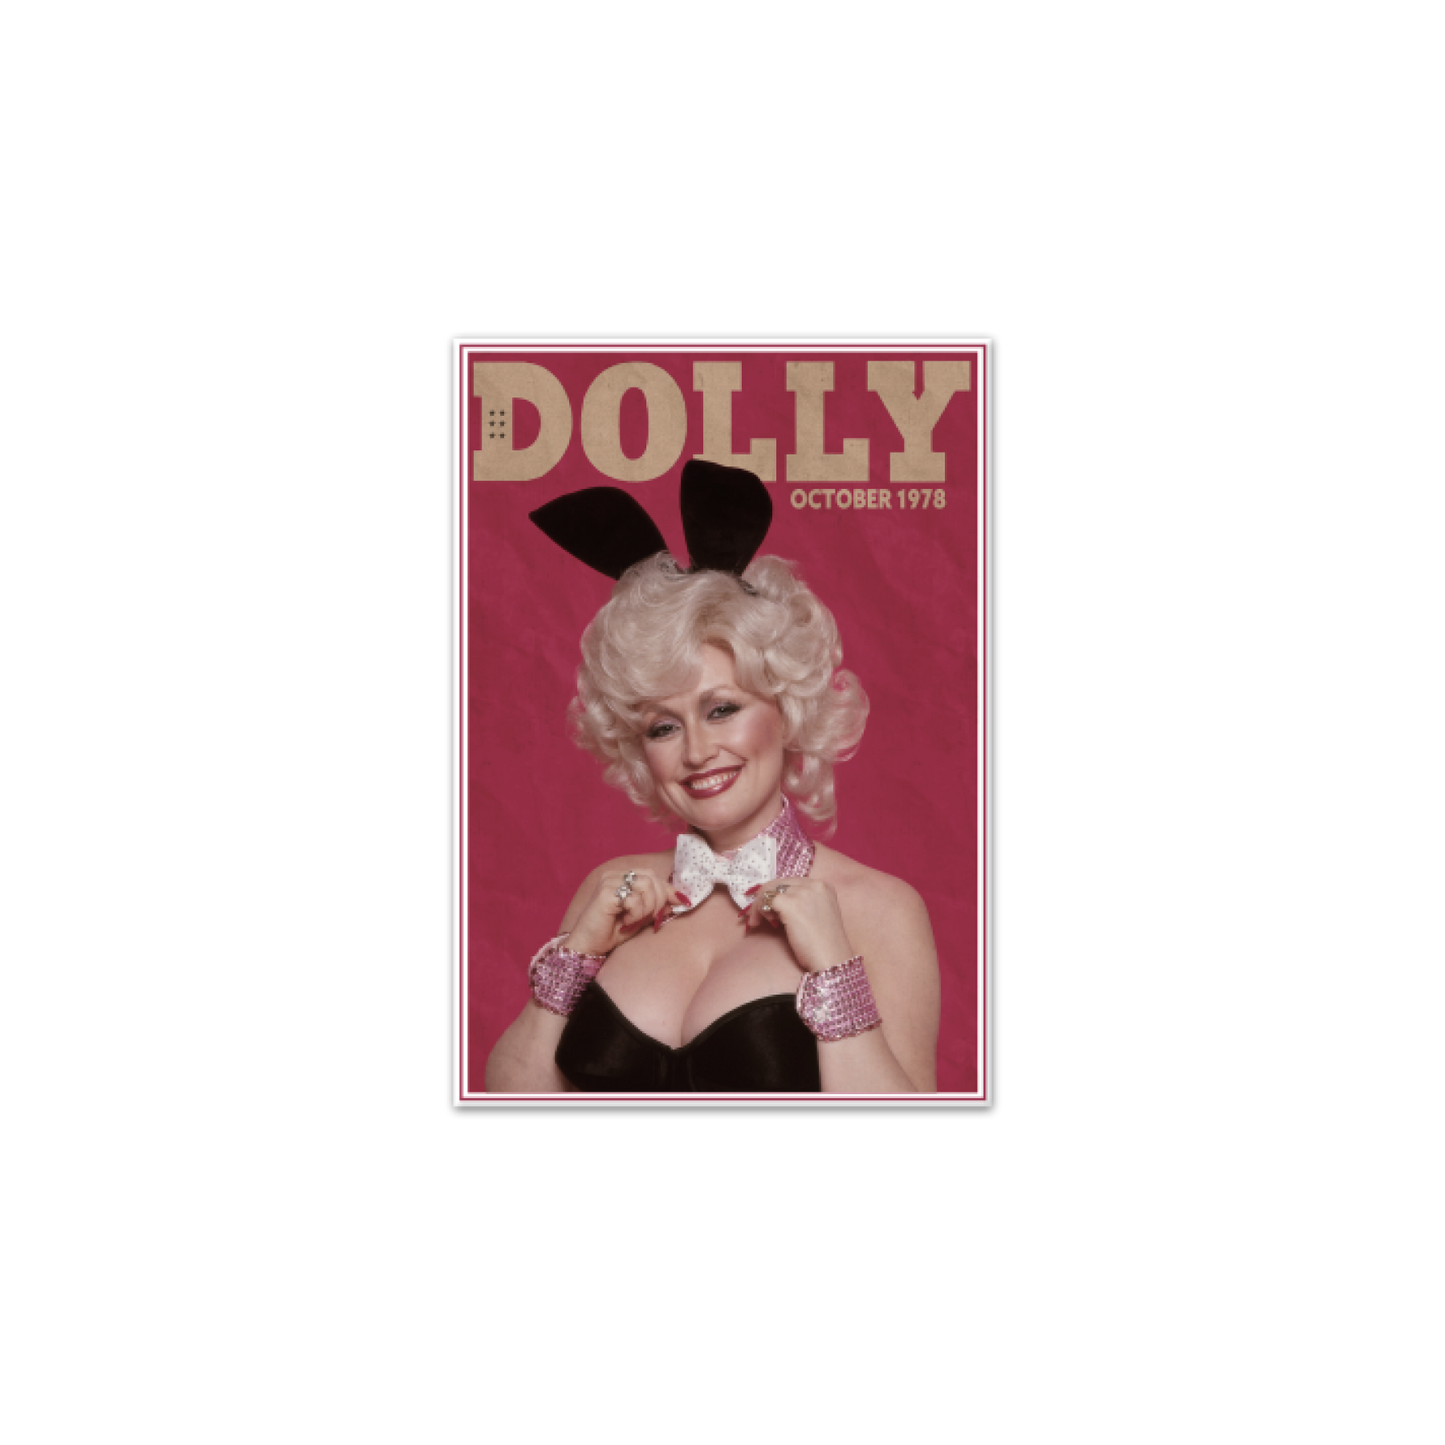 Official Dolly Parton Merchandise. Dolly Bunny 1978 Playboy Cover Image 5" x 7" Magnet.